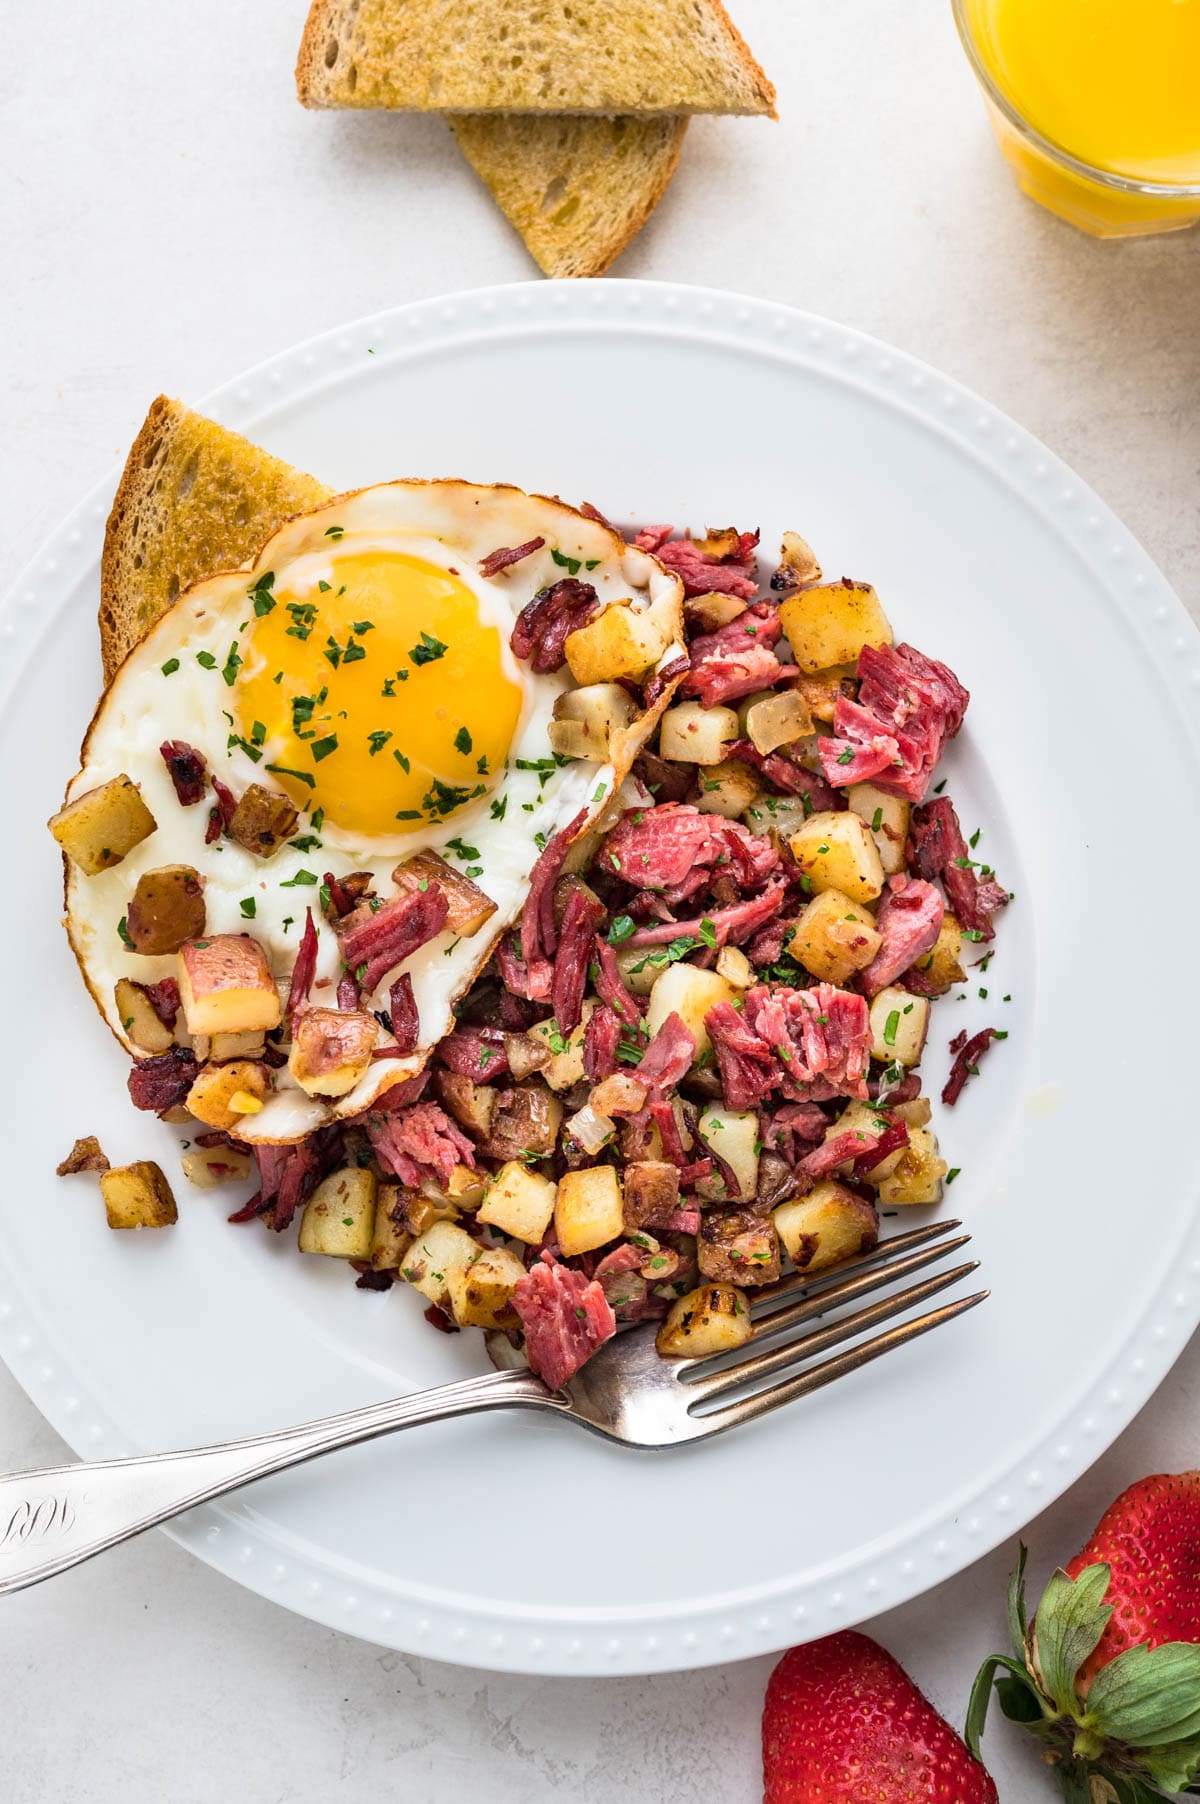 A serving of corned beef hash with fried eggs, toast and juice for breakfast.